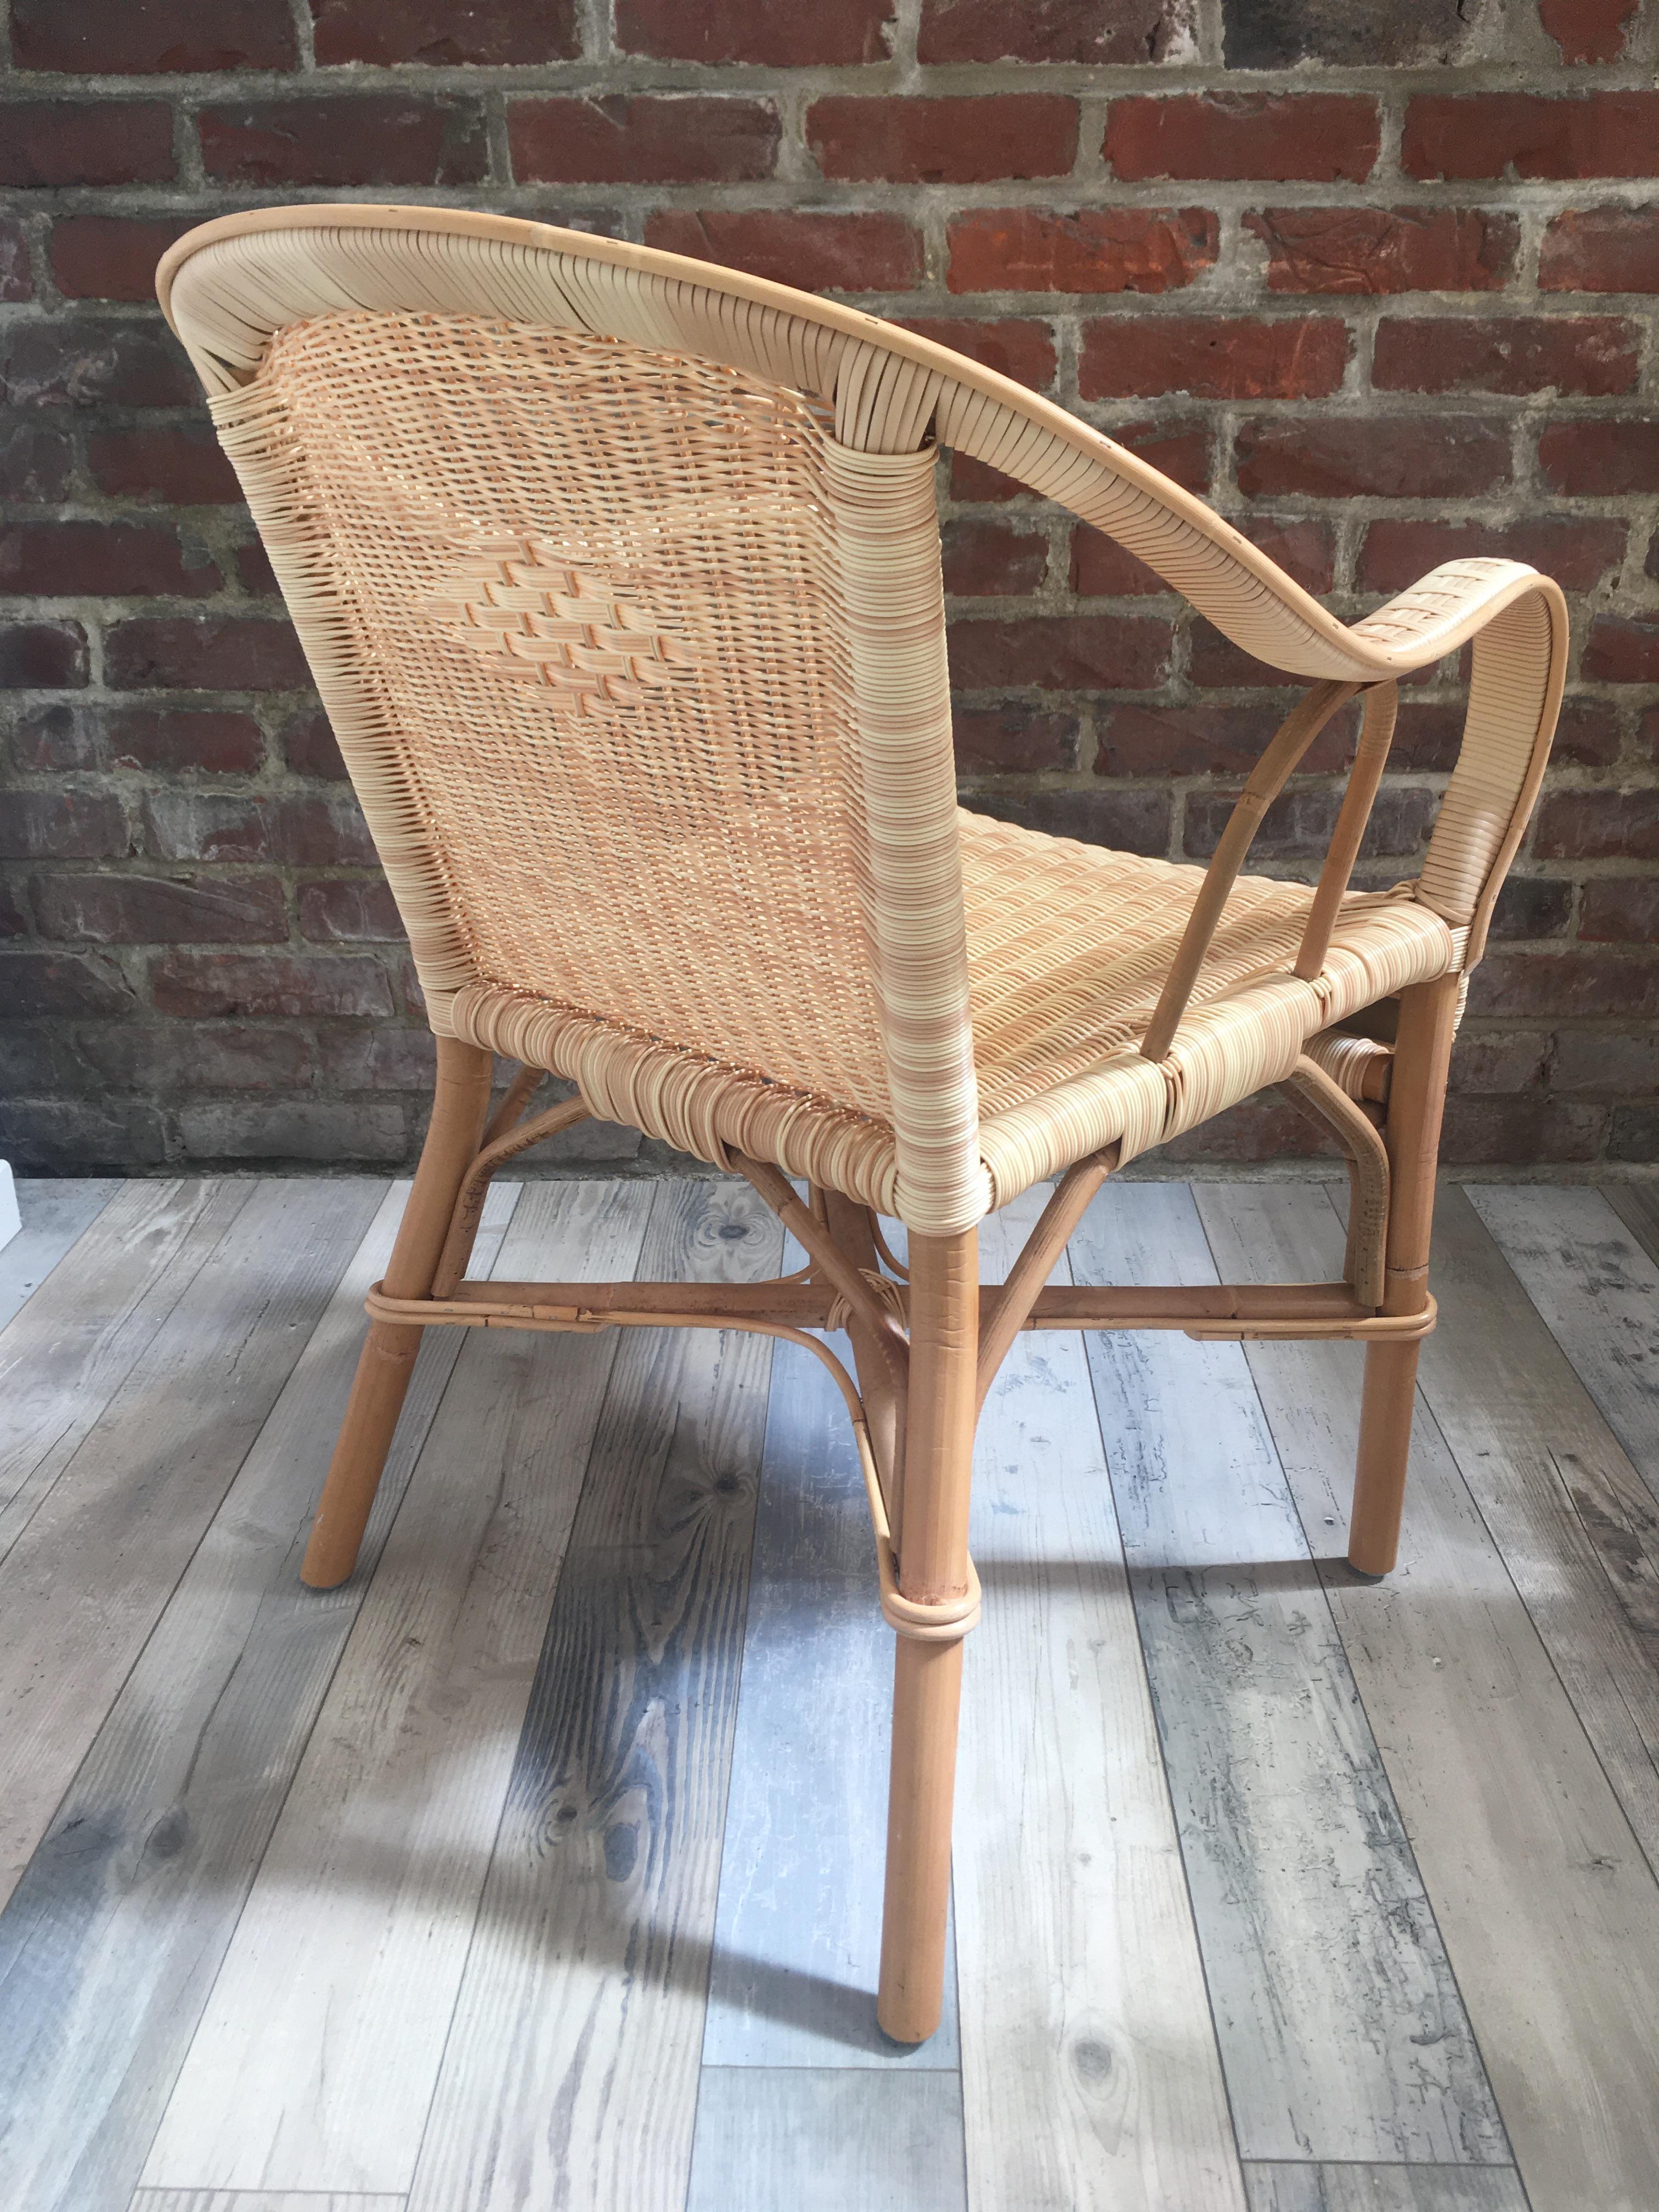 french rattan chair